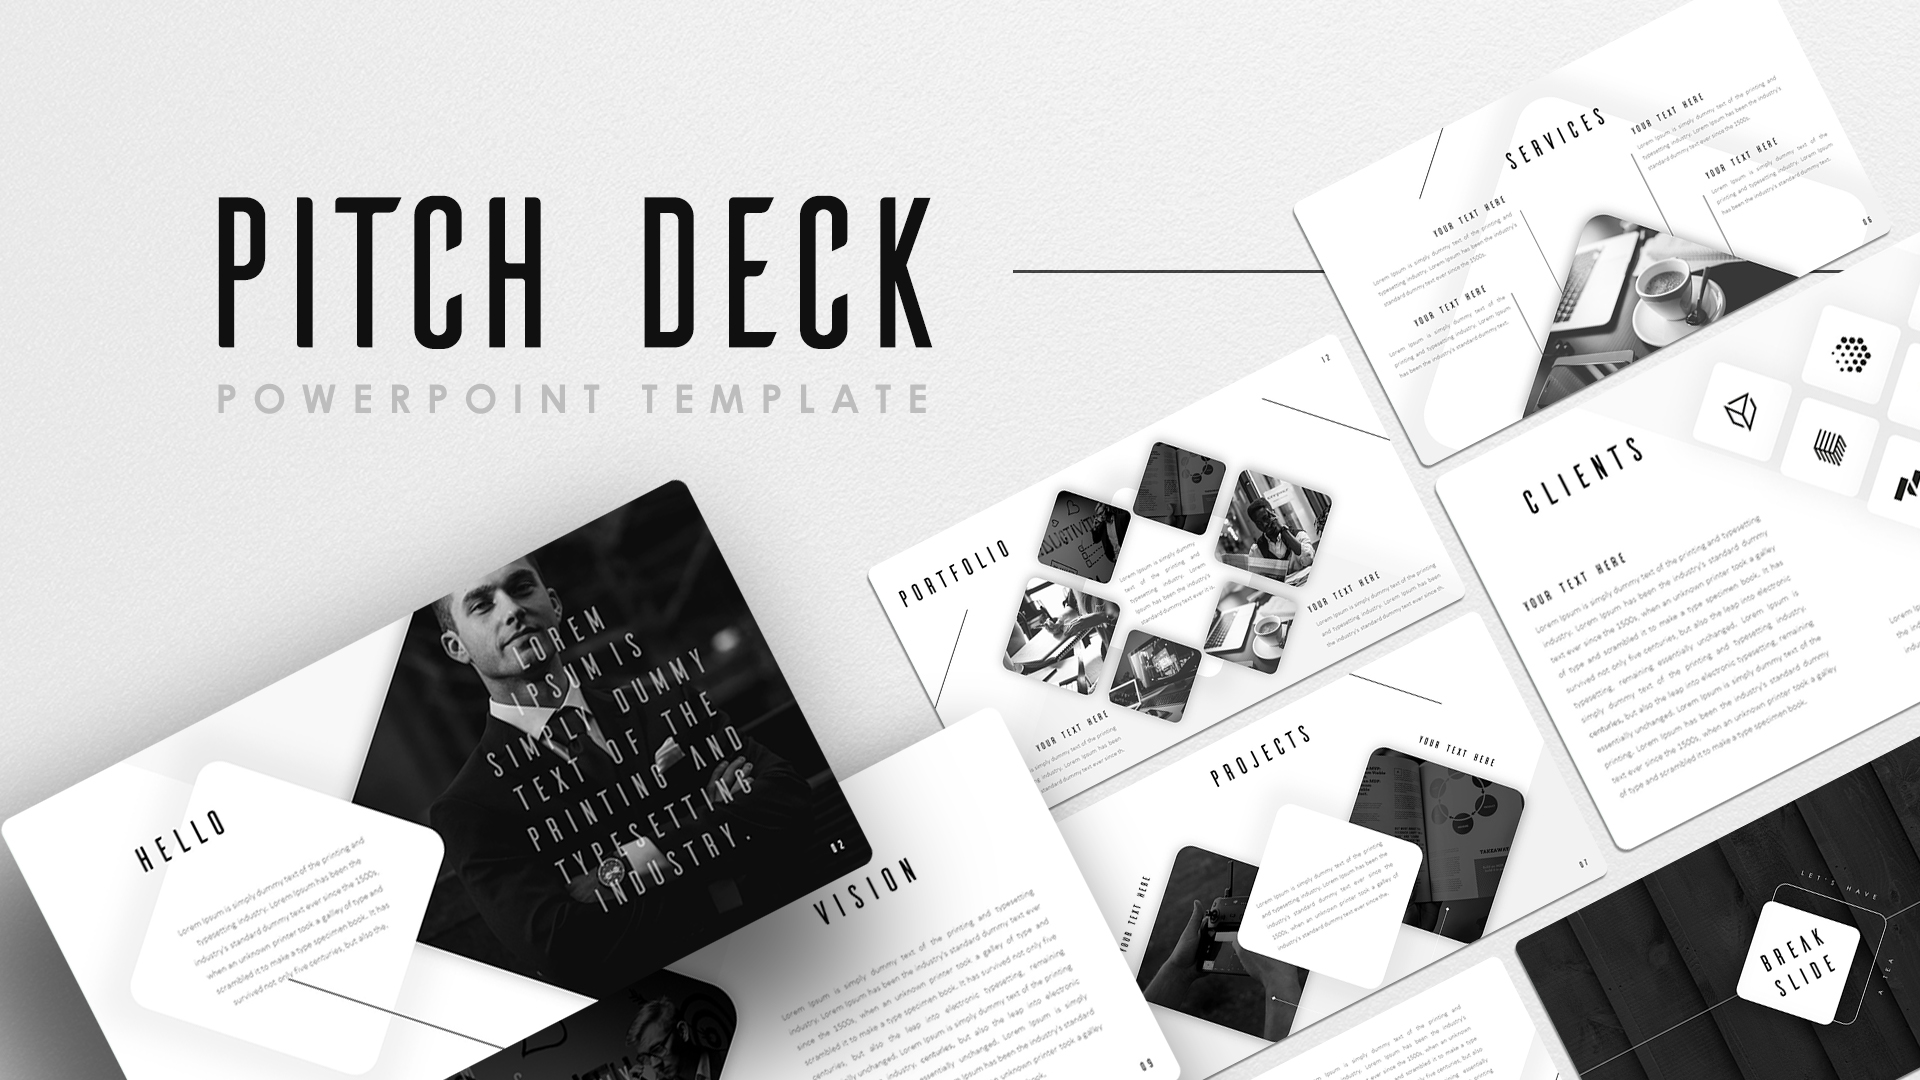 Pitch Deck powerpoint template